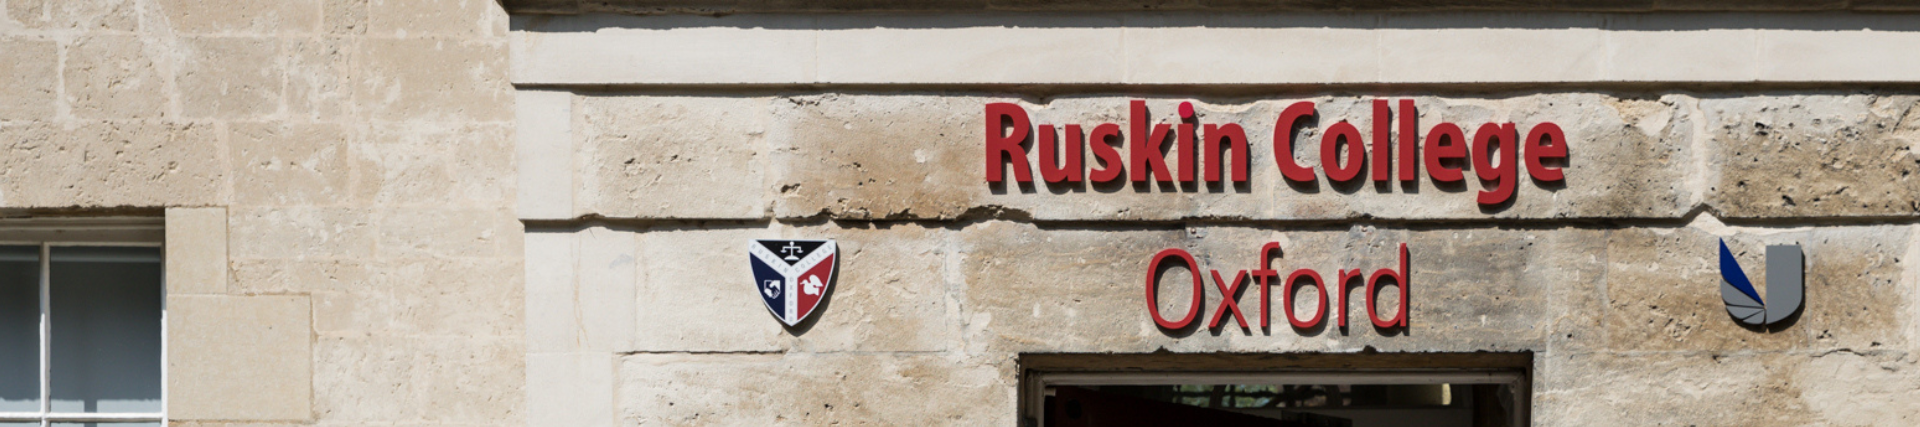 Ruskin College Oxford sign with the logo outside the entrance of the building.